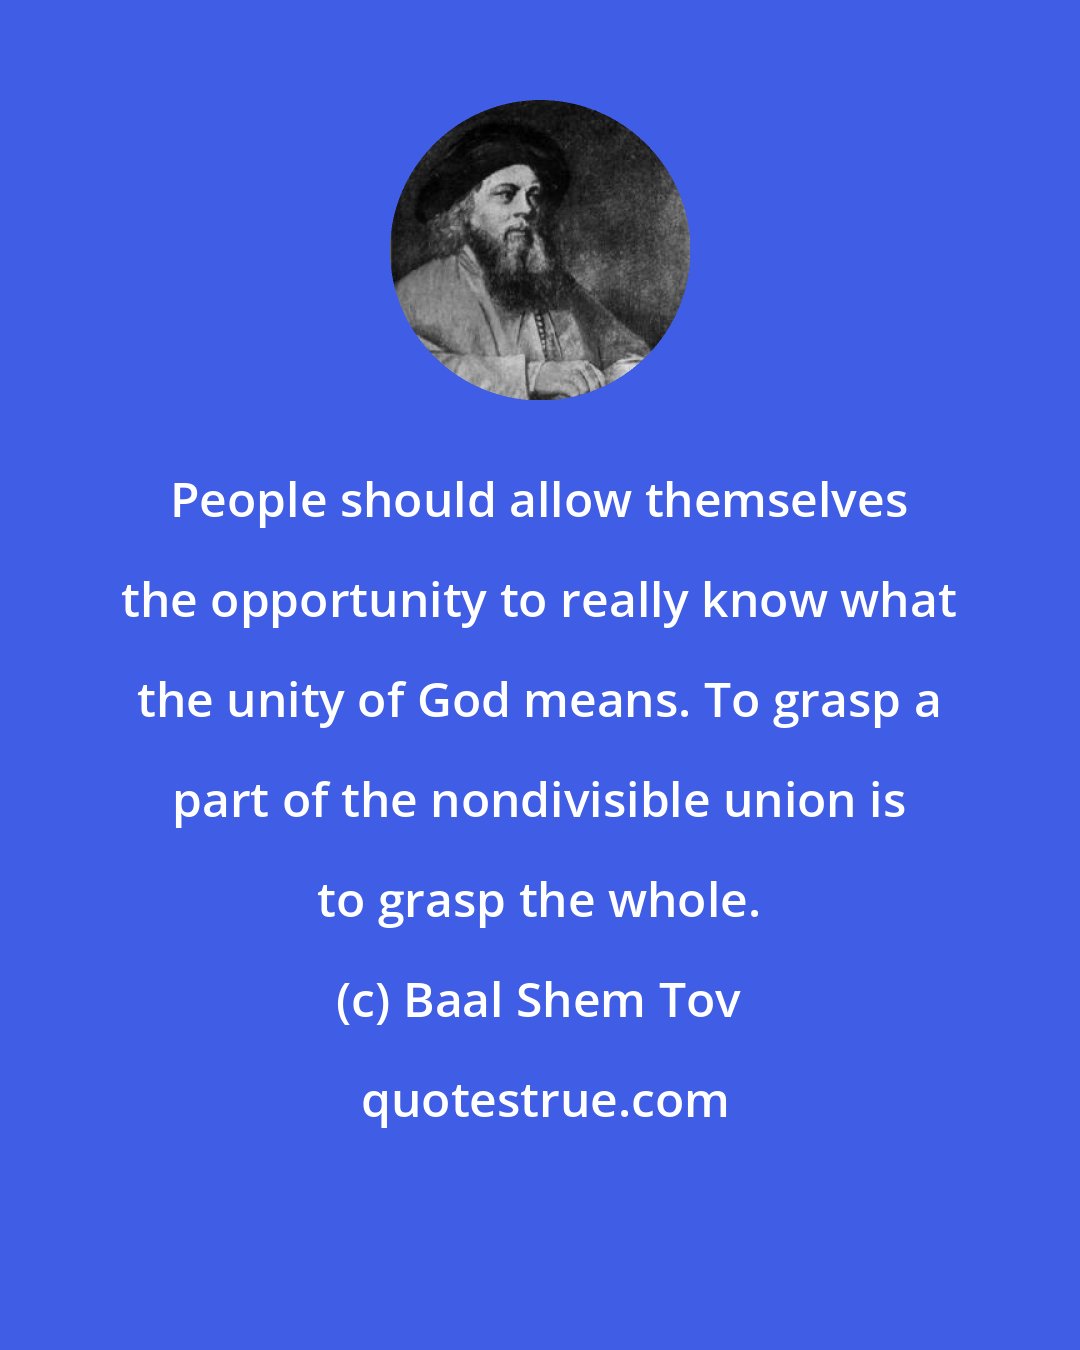 Baal Shem Tov: People should allow themselves the opportunity to really know what the unity of God means. To grasp a part of the nondivisible union is to grasp the whole.